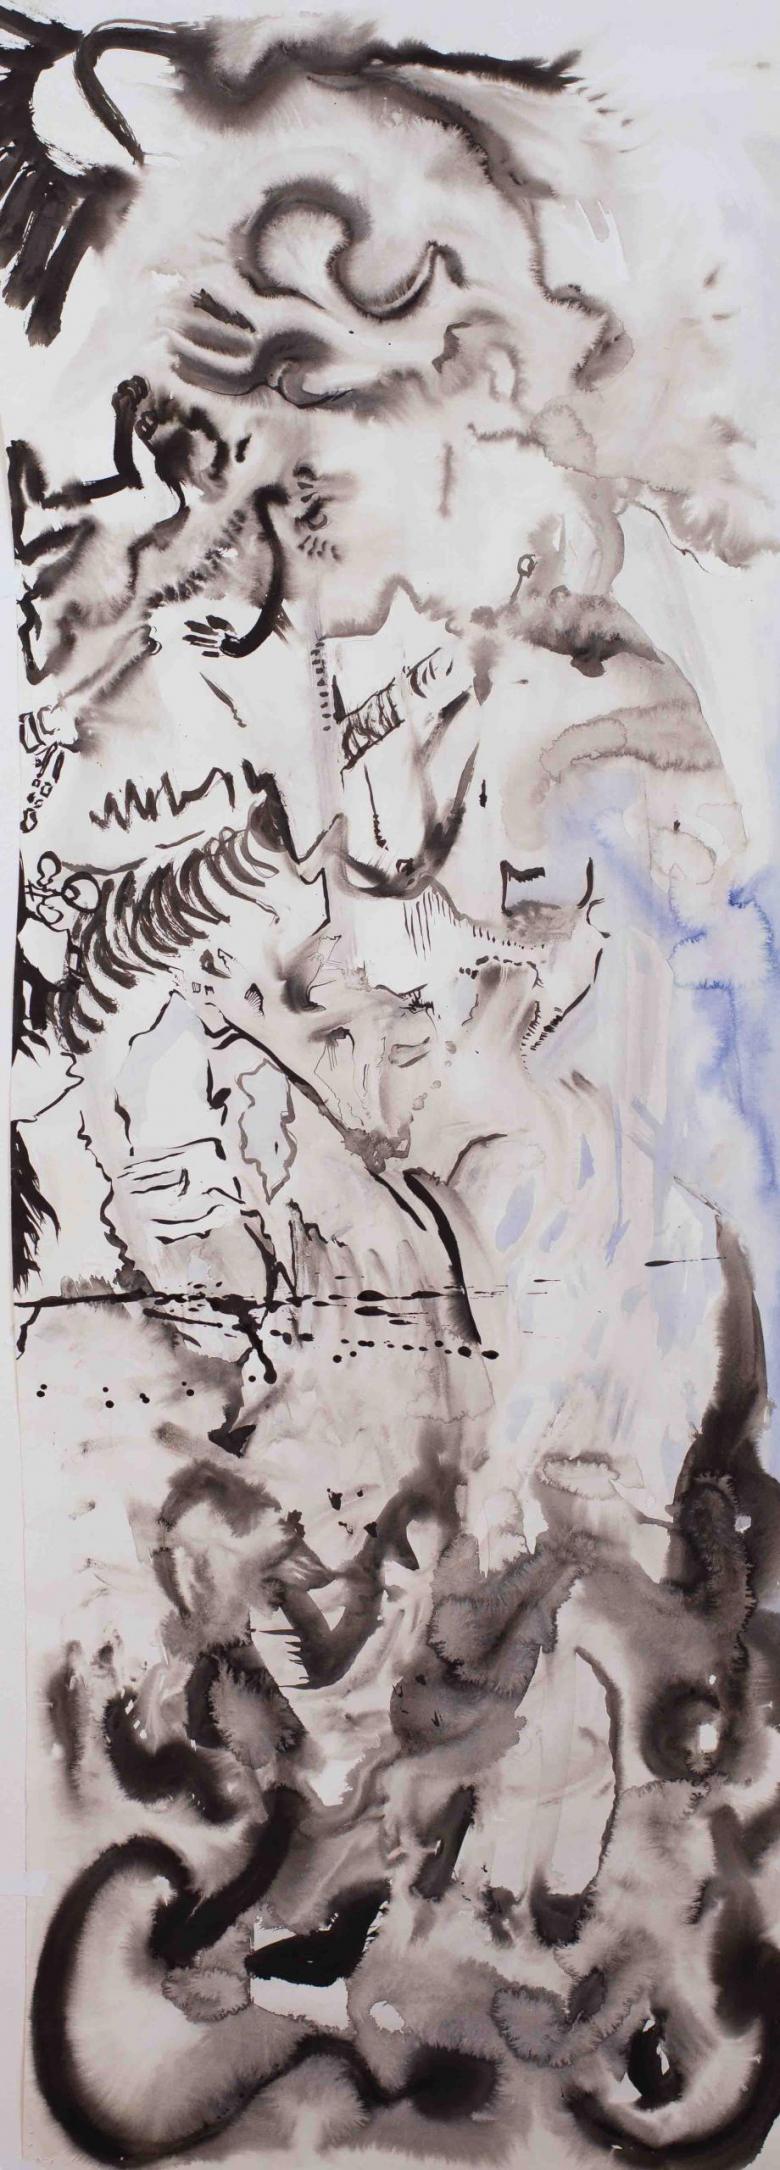 Abstract Lansdcape. Sumi ink on high quality acid-free art paper, 60.5x22in - 151x56cm. Fig. 319